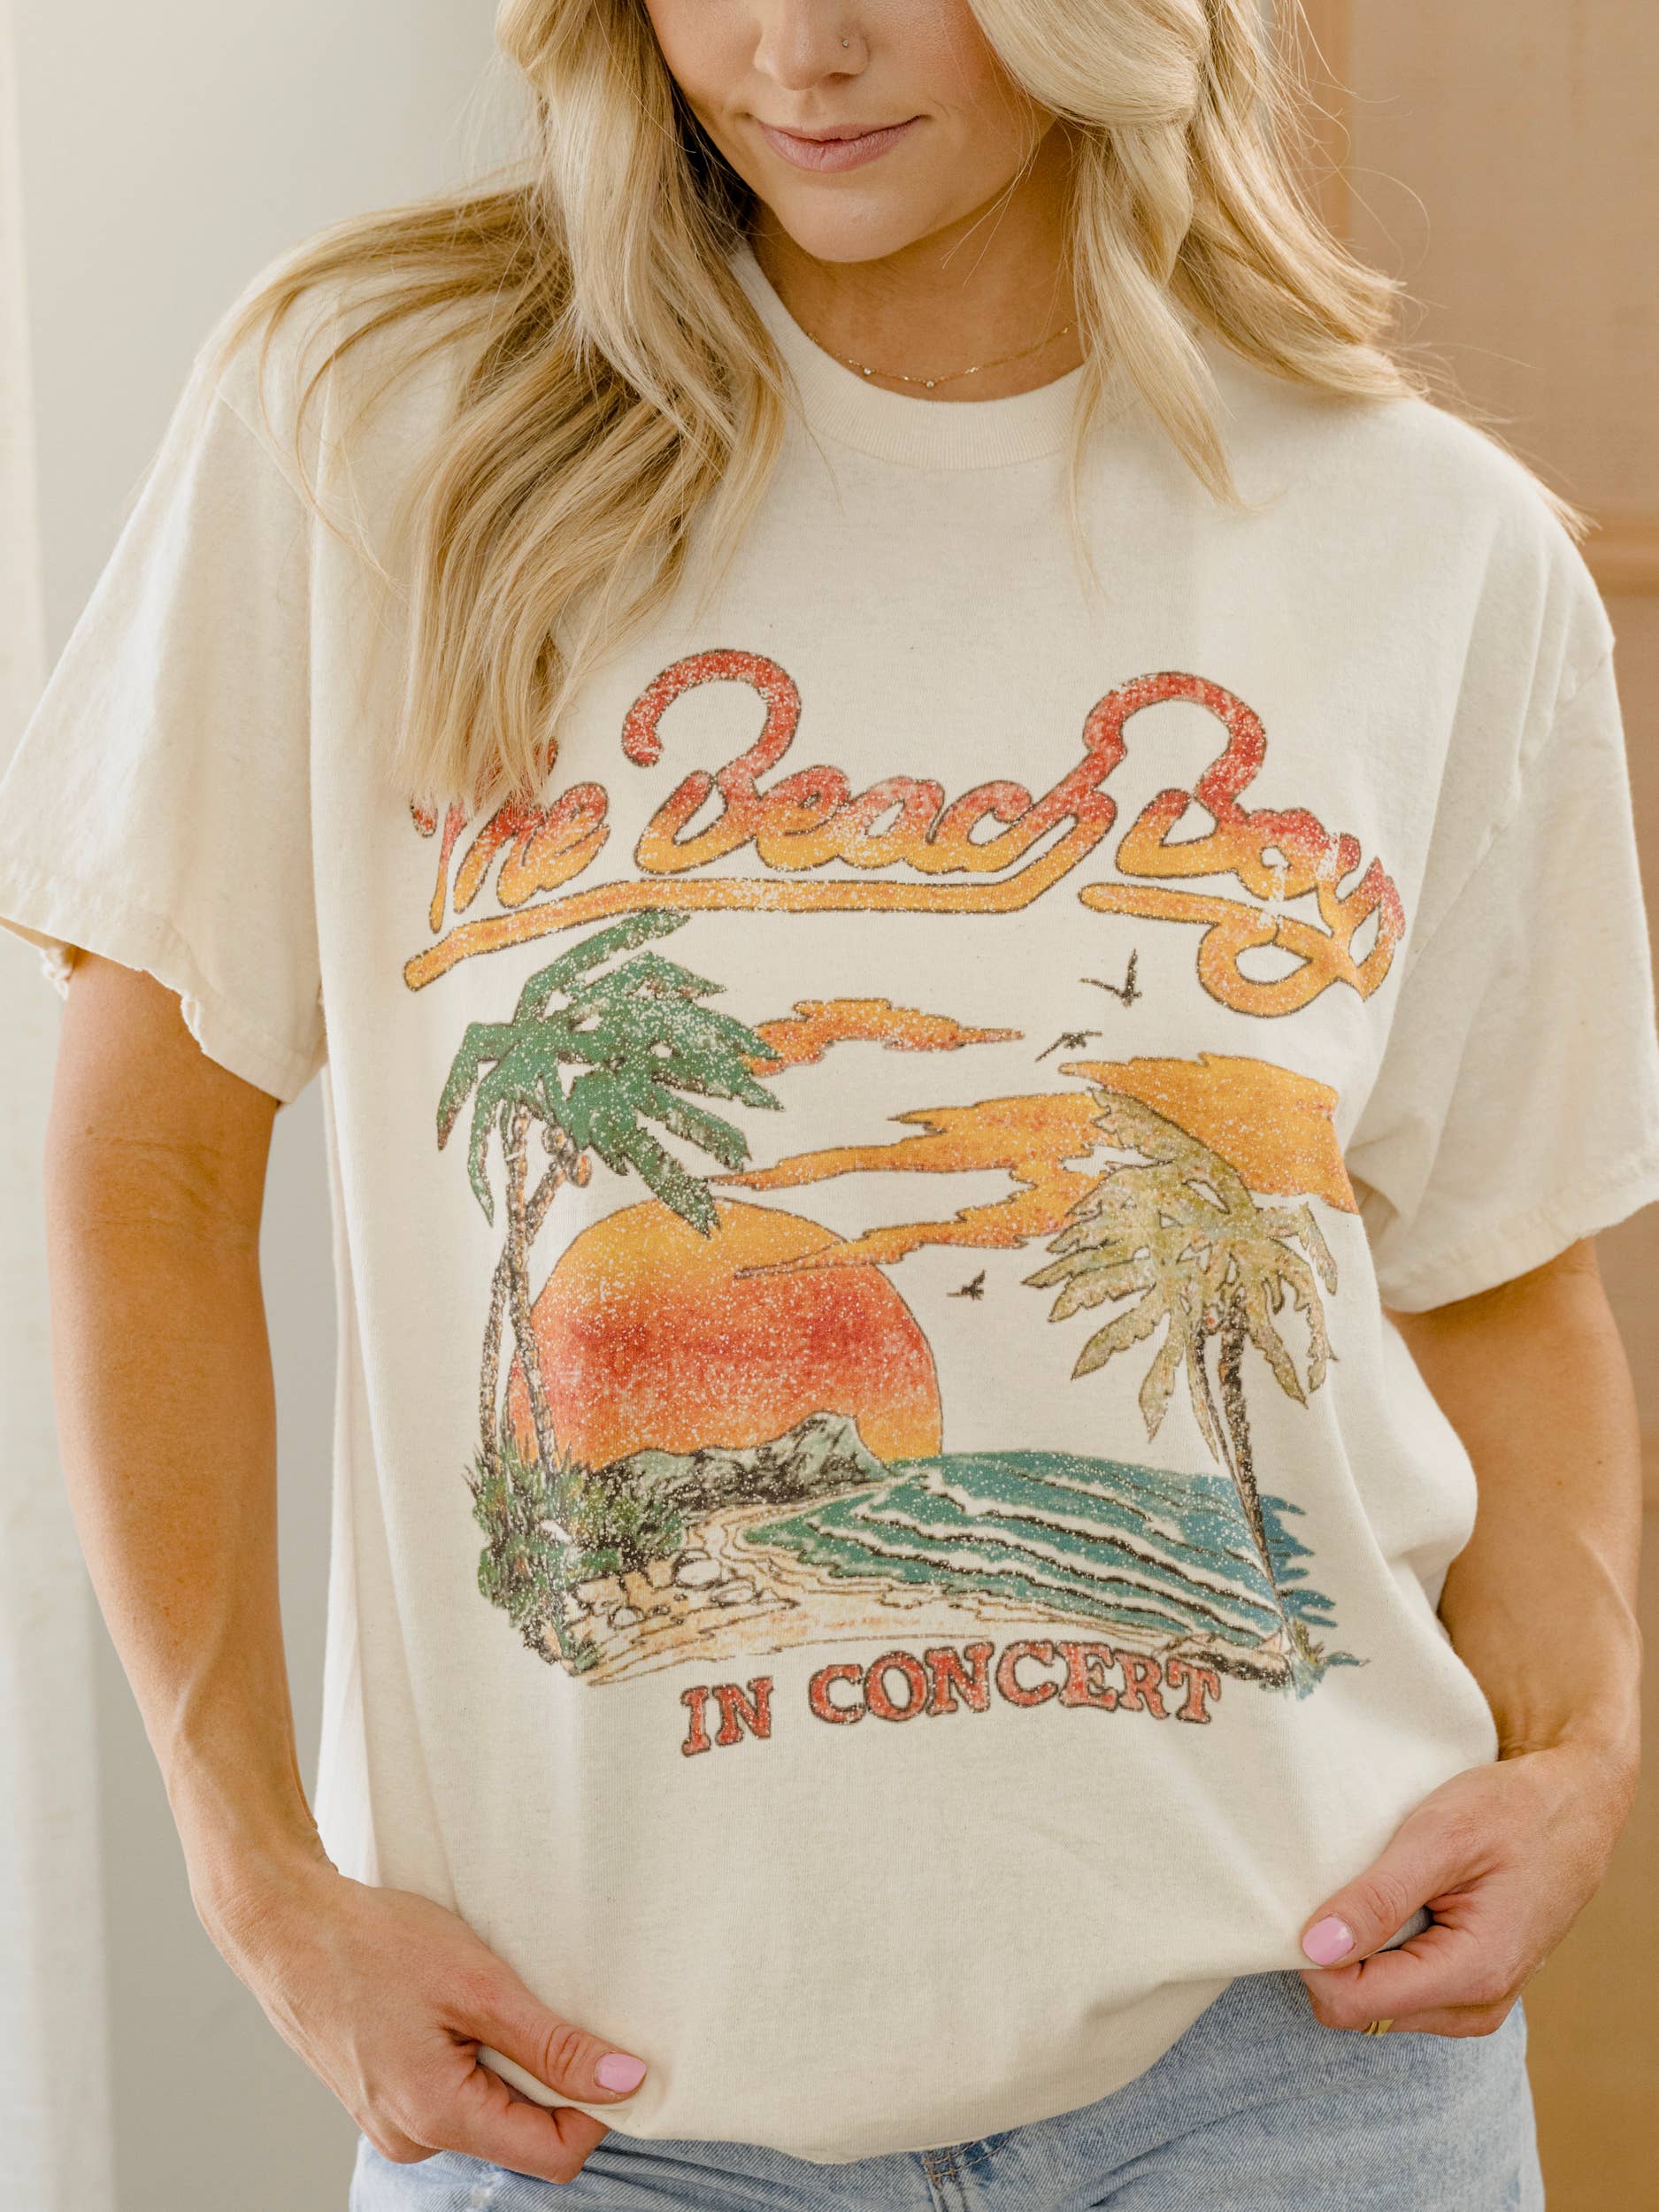 LivyLu - The Beach Boys In Concert Off White Thrifted Graphic Tee